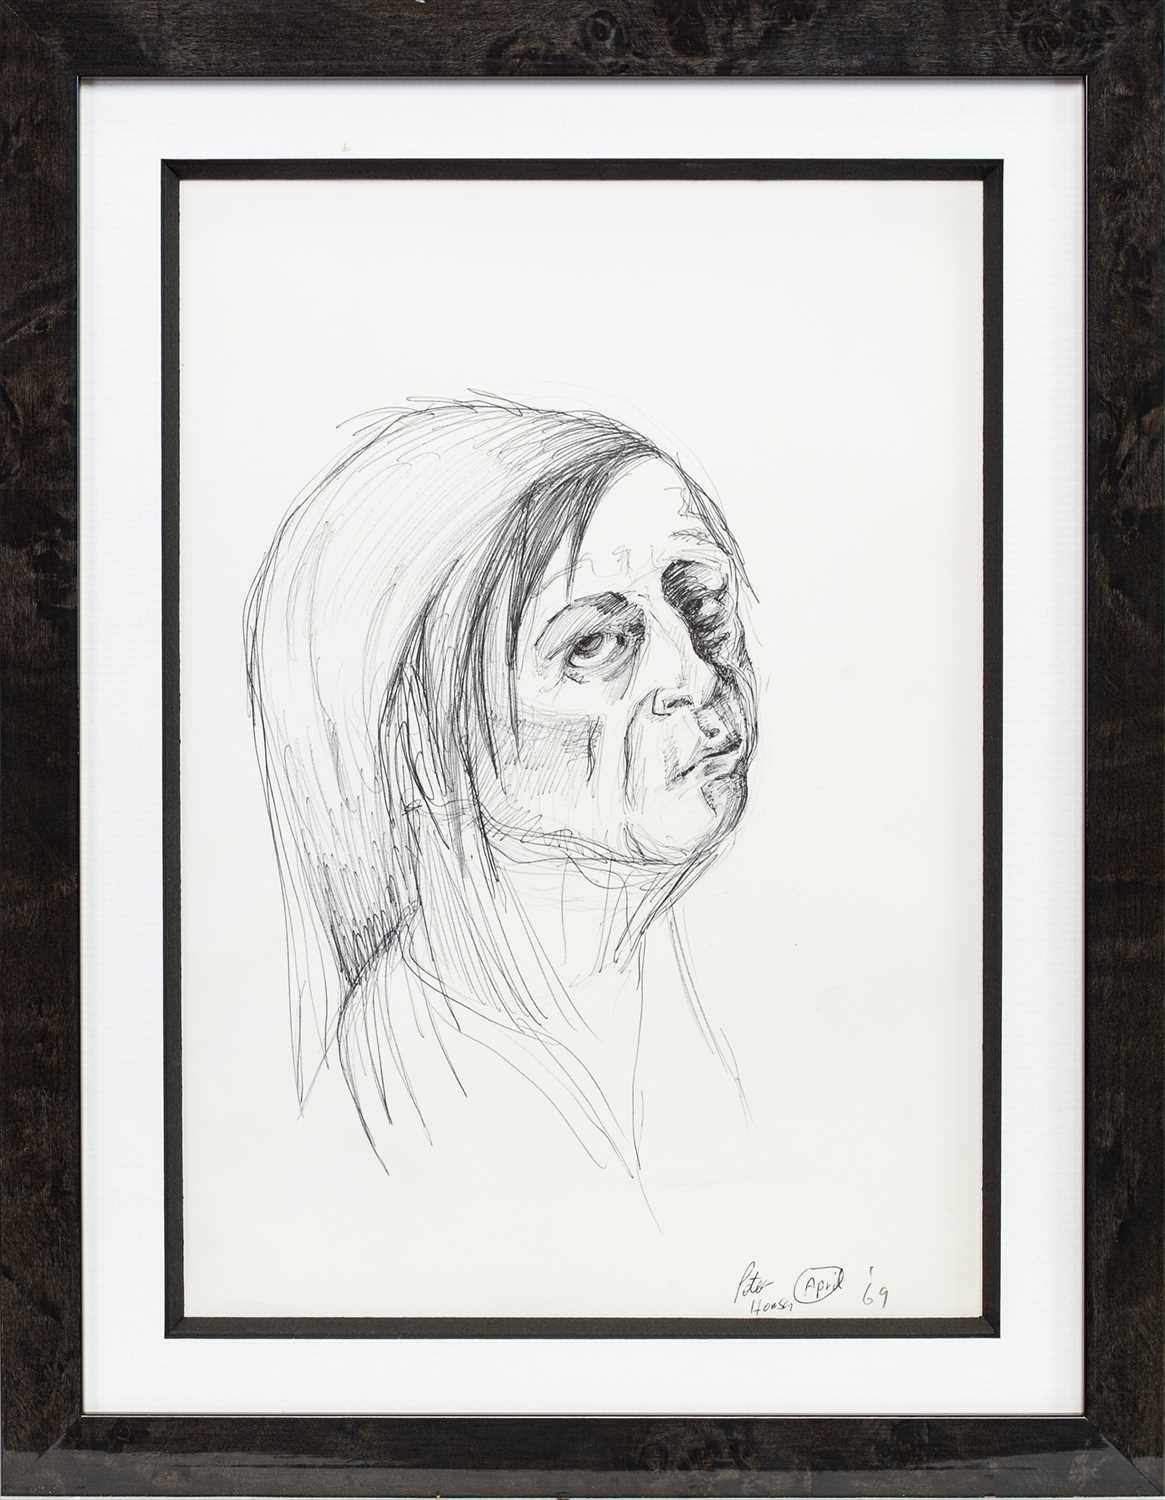 Lot 161 - A VERY EARLY PORTRAIT STUDY IN BIRO BY PETER HOWSON